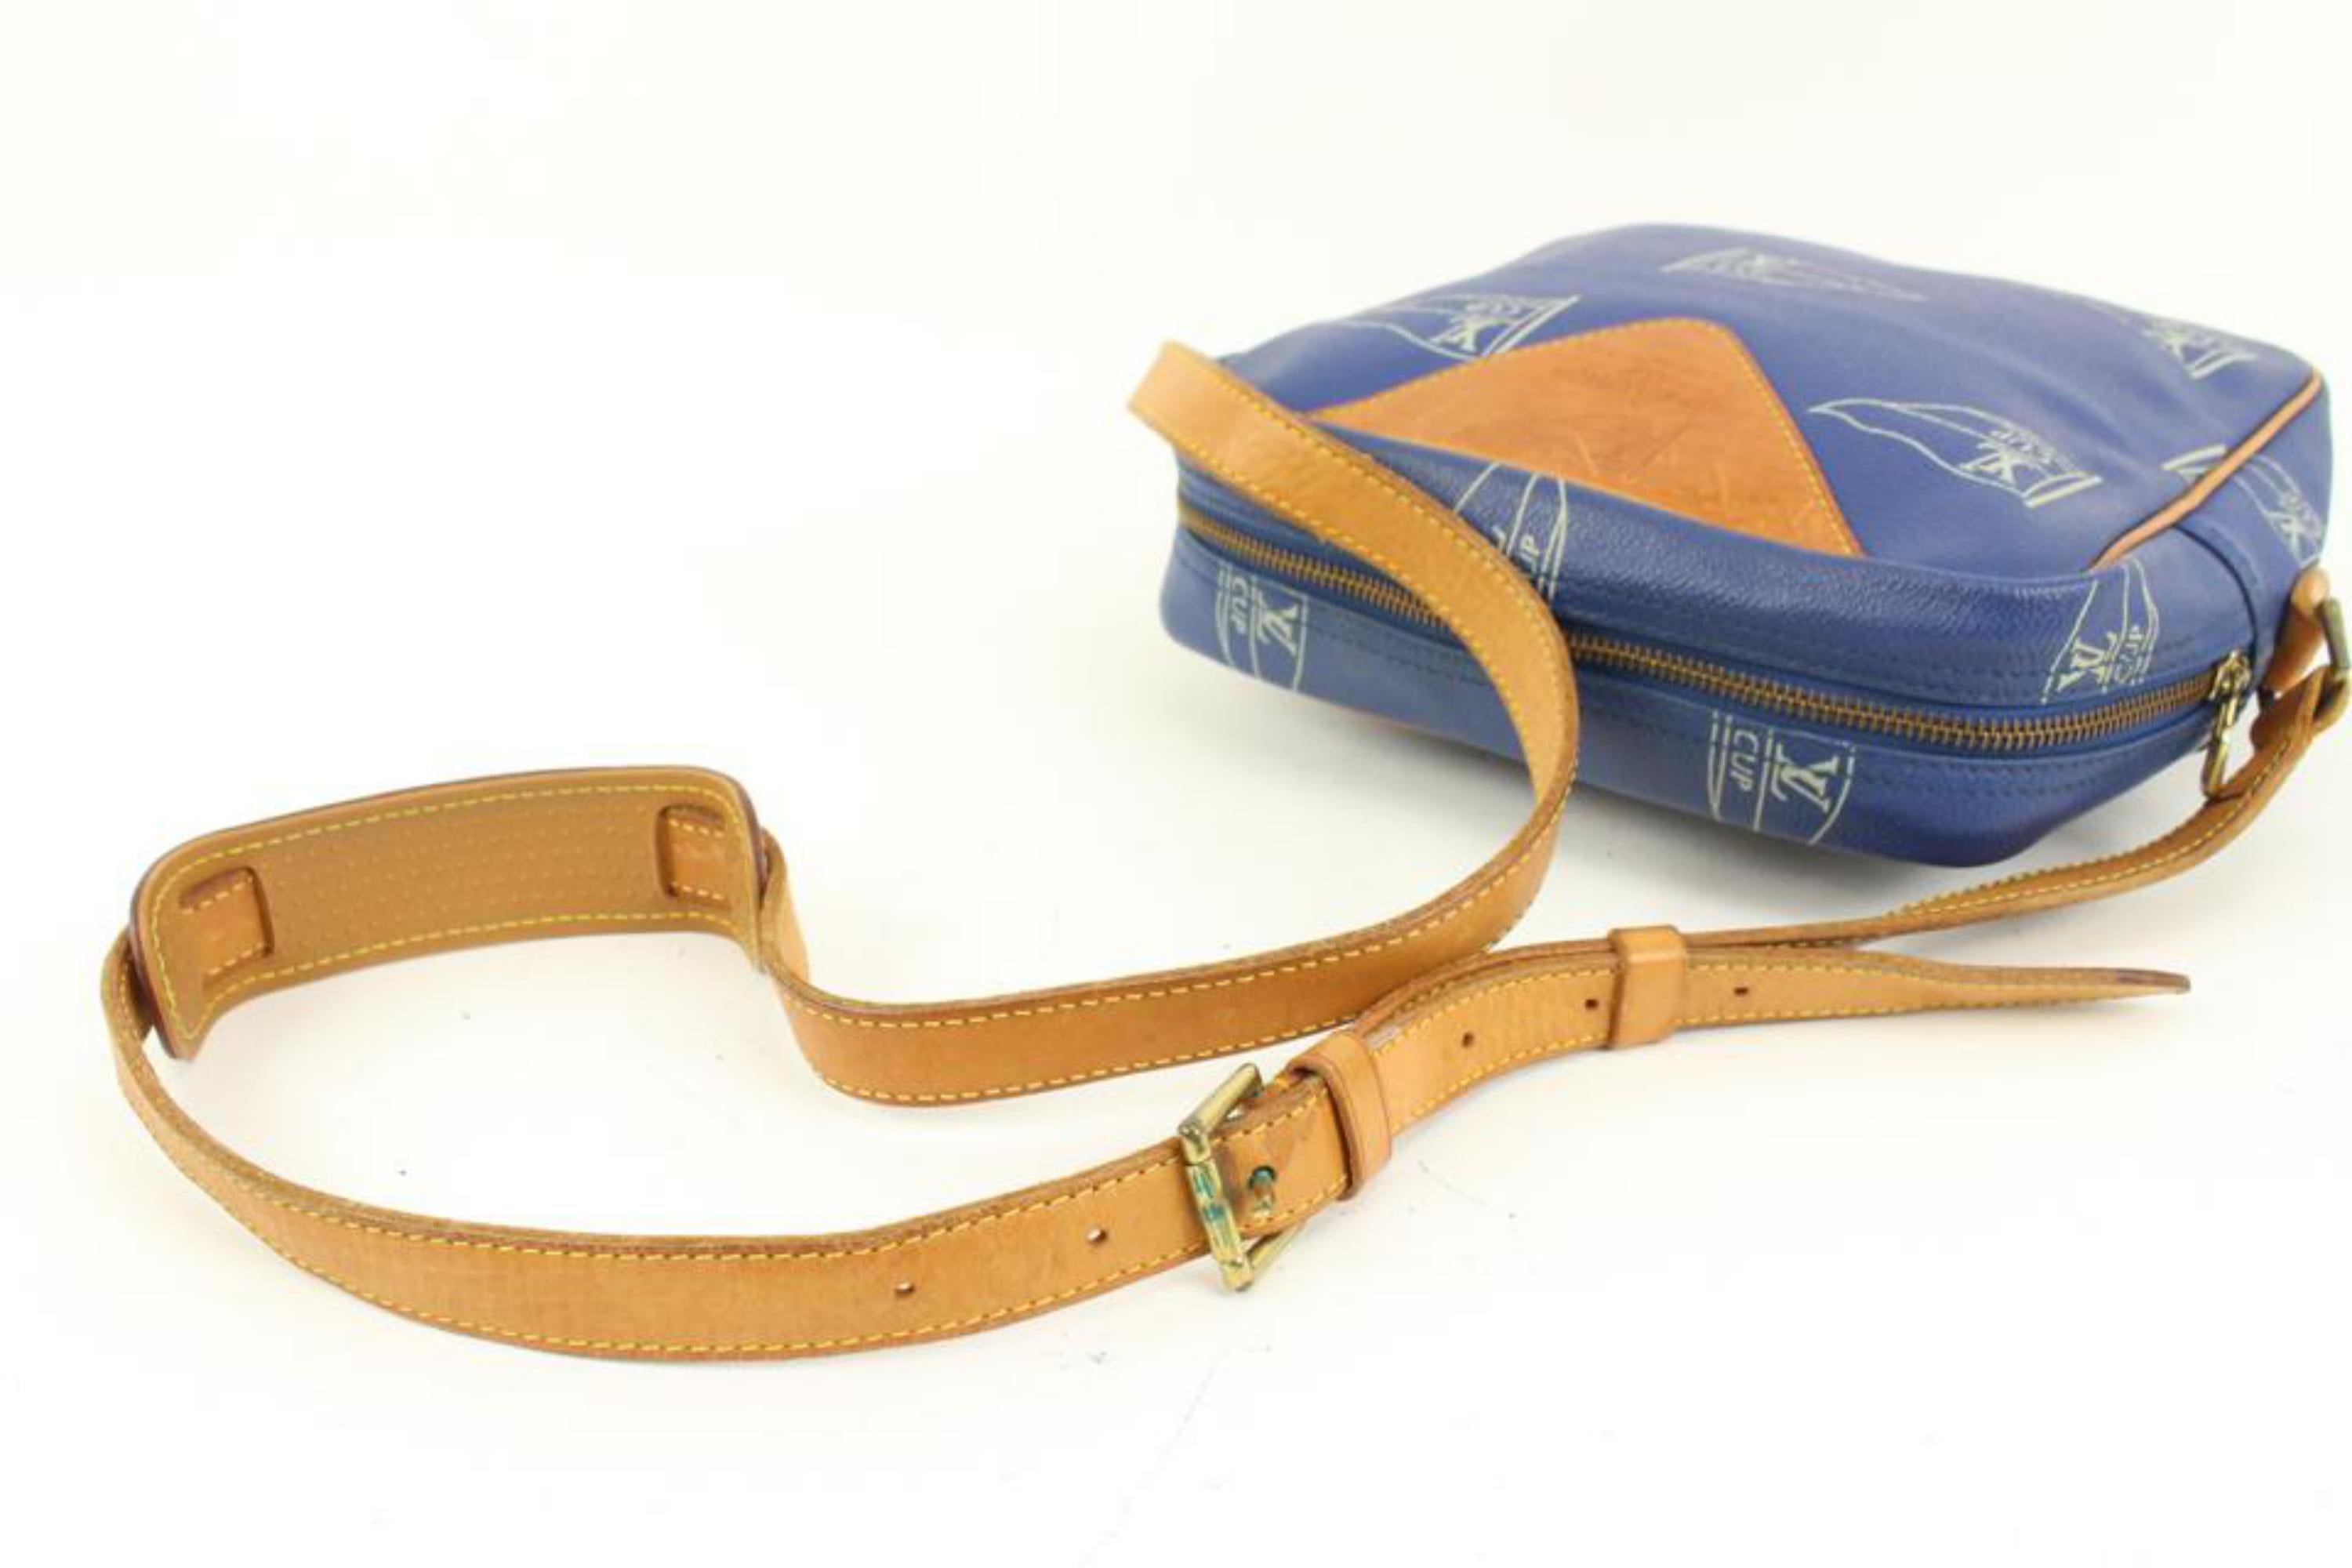 Louis Vuitton 1991 Blue LV Cup Sac San Diego Crossbody Bag 96lz425s
Date Code/Serial Number: MI1901
Made In: France
Measurements: Length:  8.5